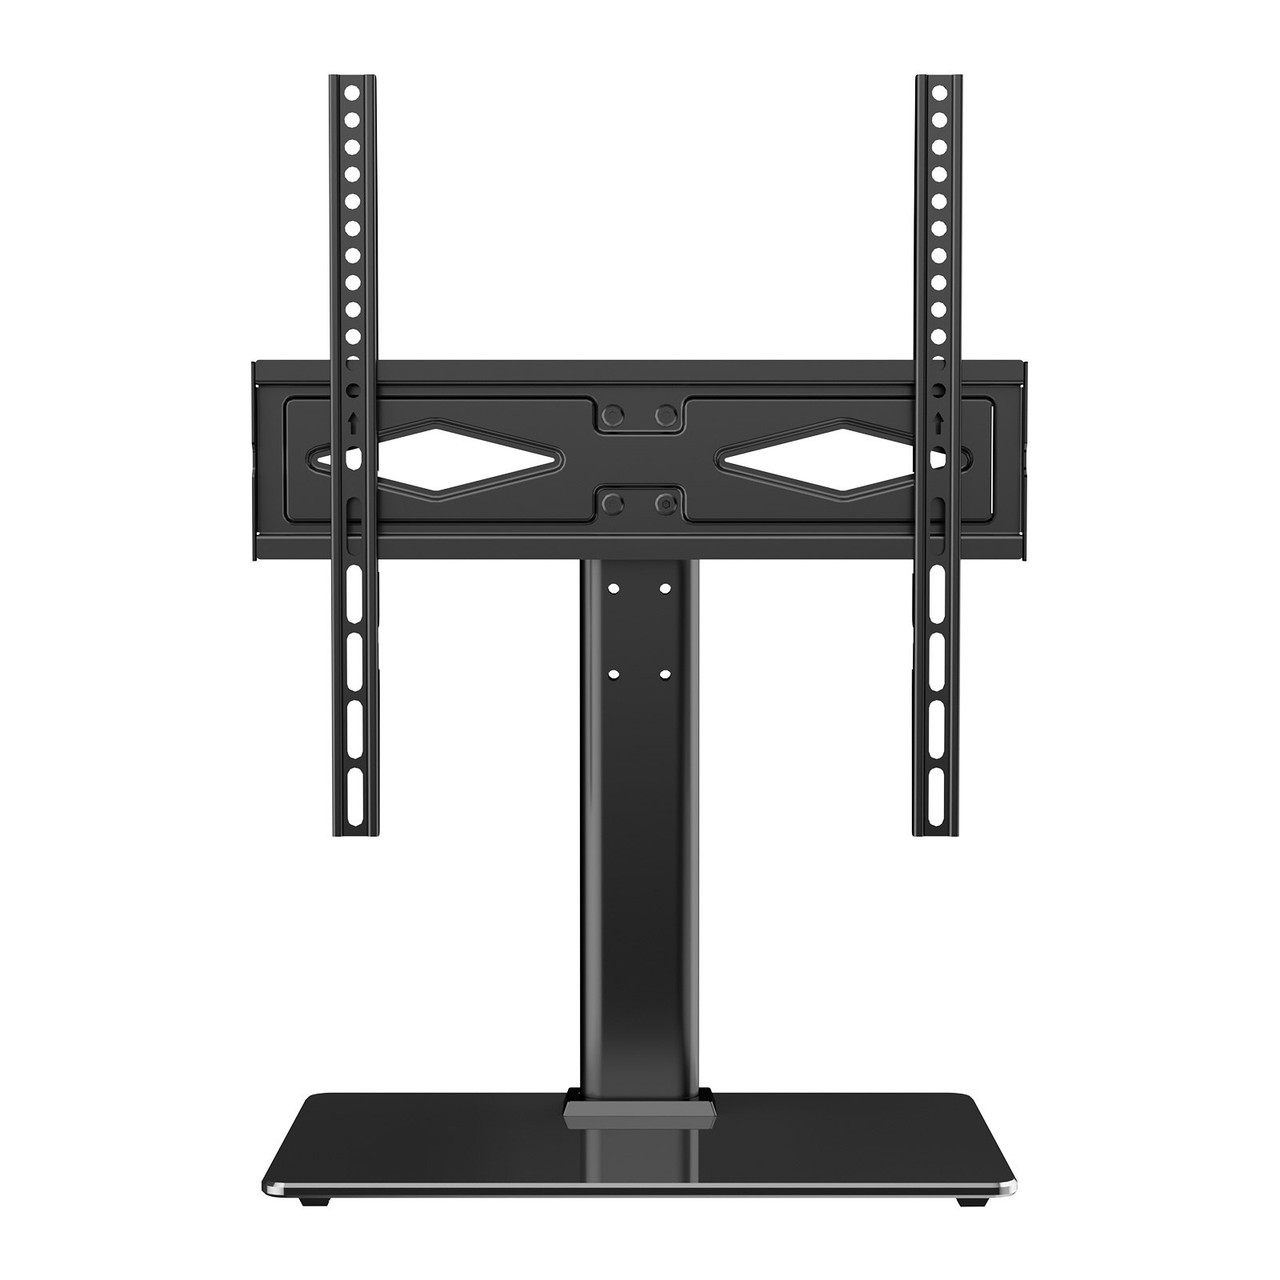 VEVOR TV Stand Mount, Swivel Universal TV Stand for 32 to 55 inch TVs, Height Adjustable Portable Floor TV Stand with Tempered Glass Base for Bedroom, Living Room